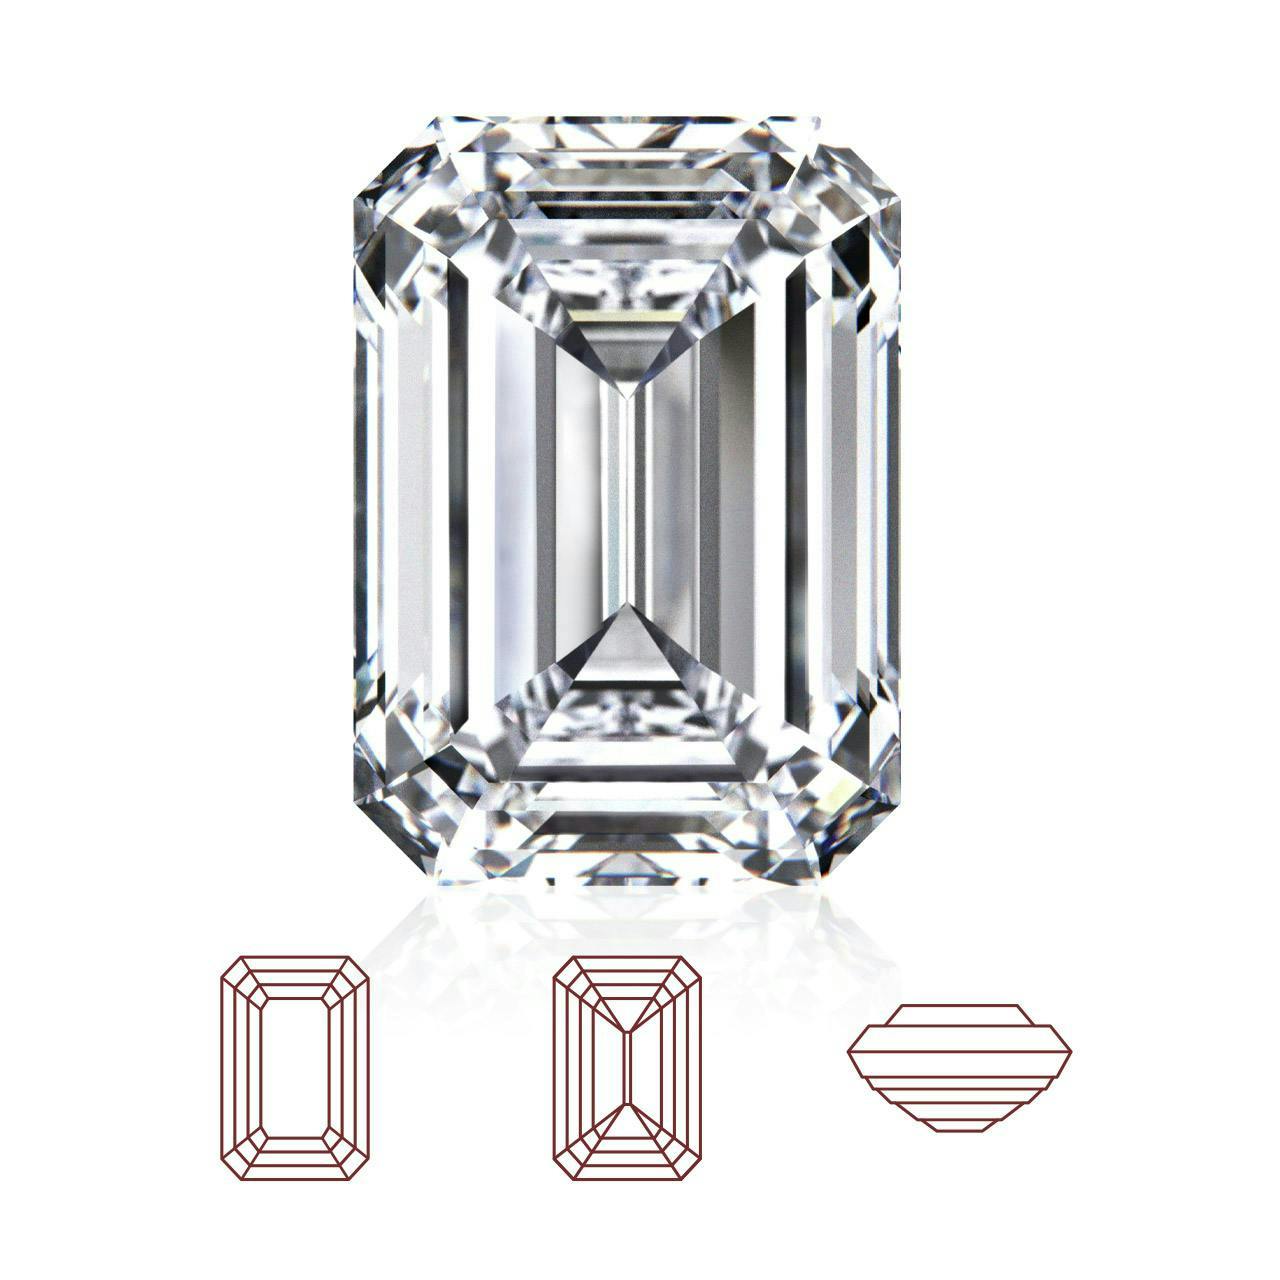 Emerald cut among different types of diamond cut from different angles